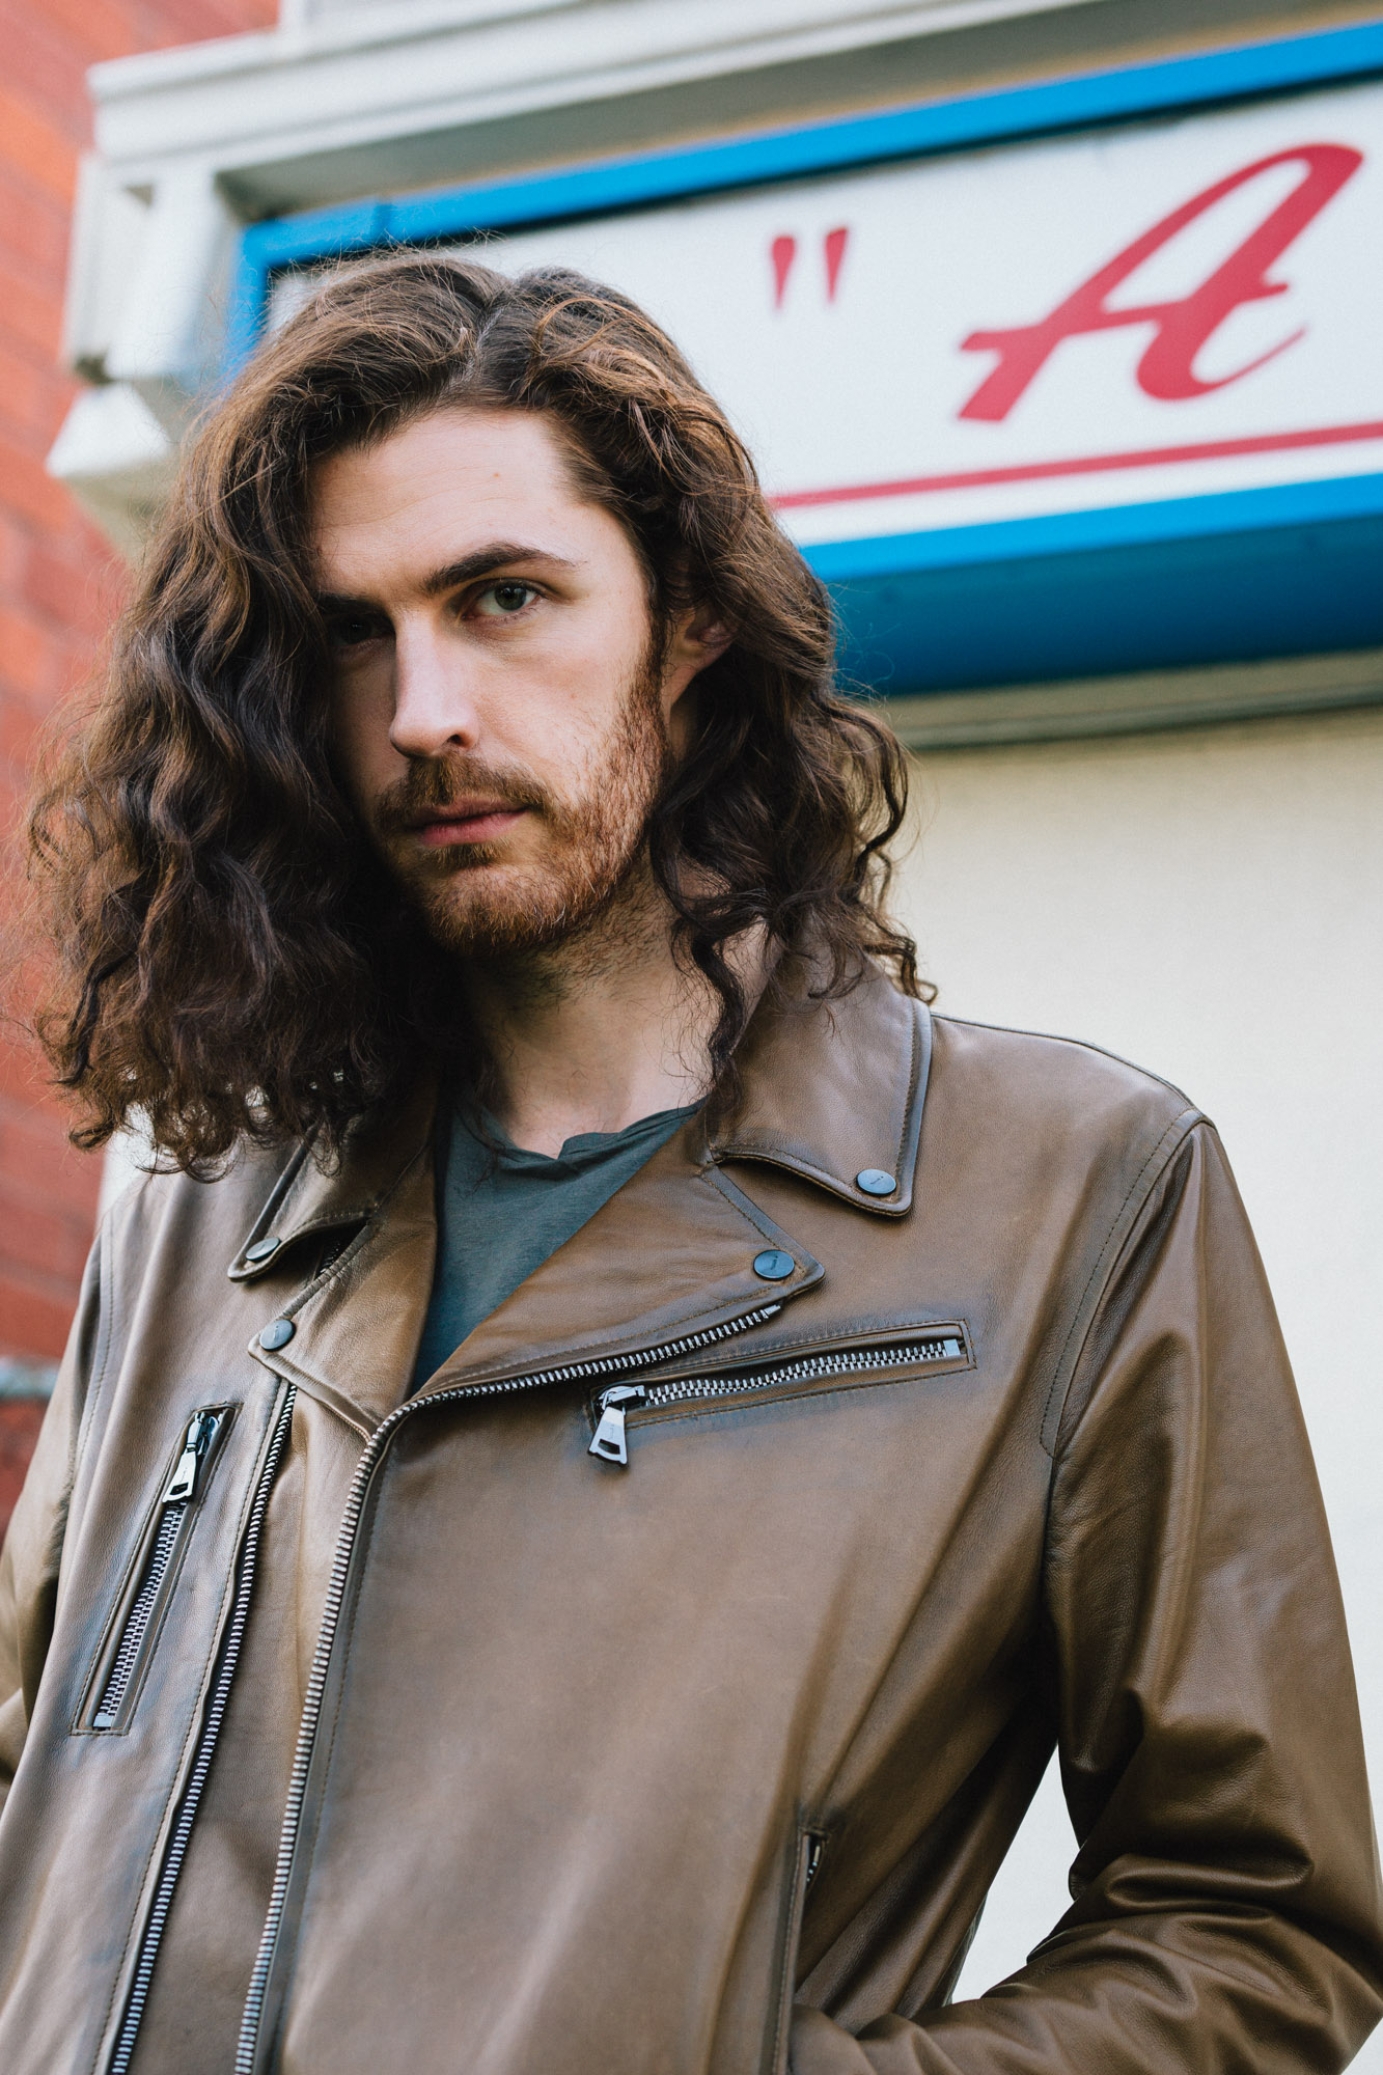 Photography for Hozier by Rachael Wright